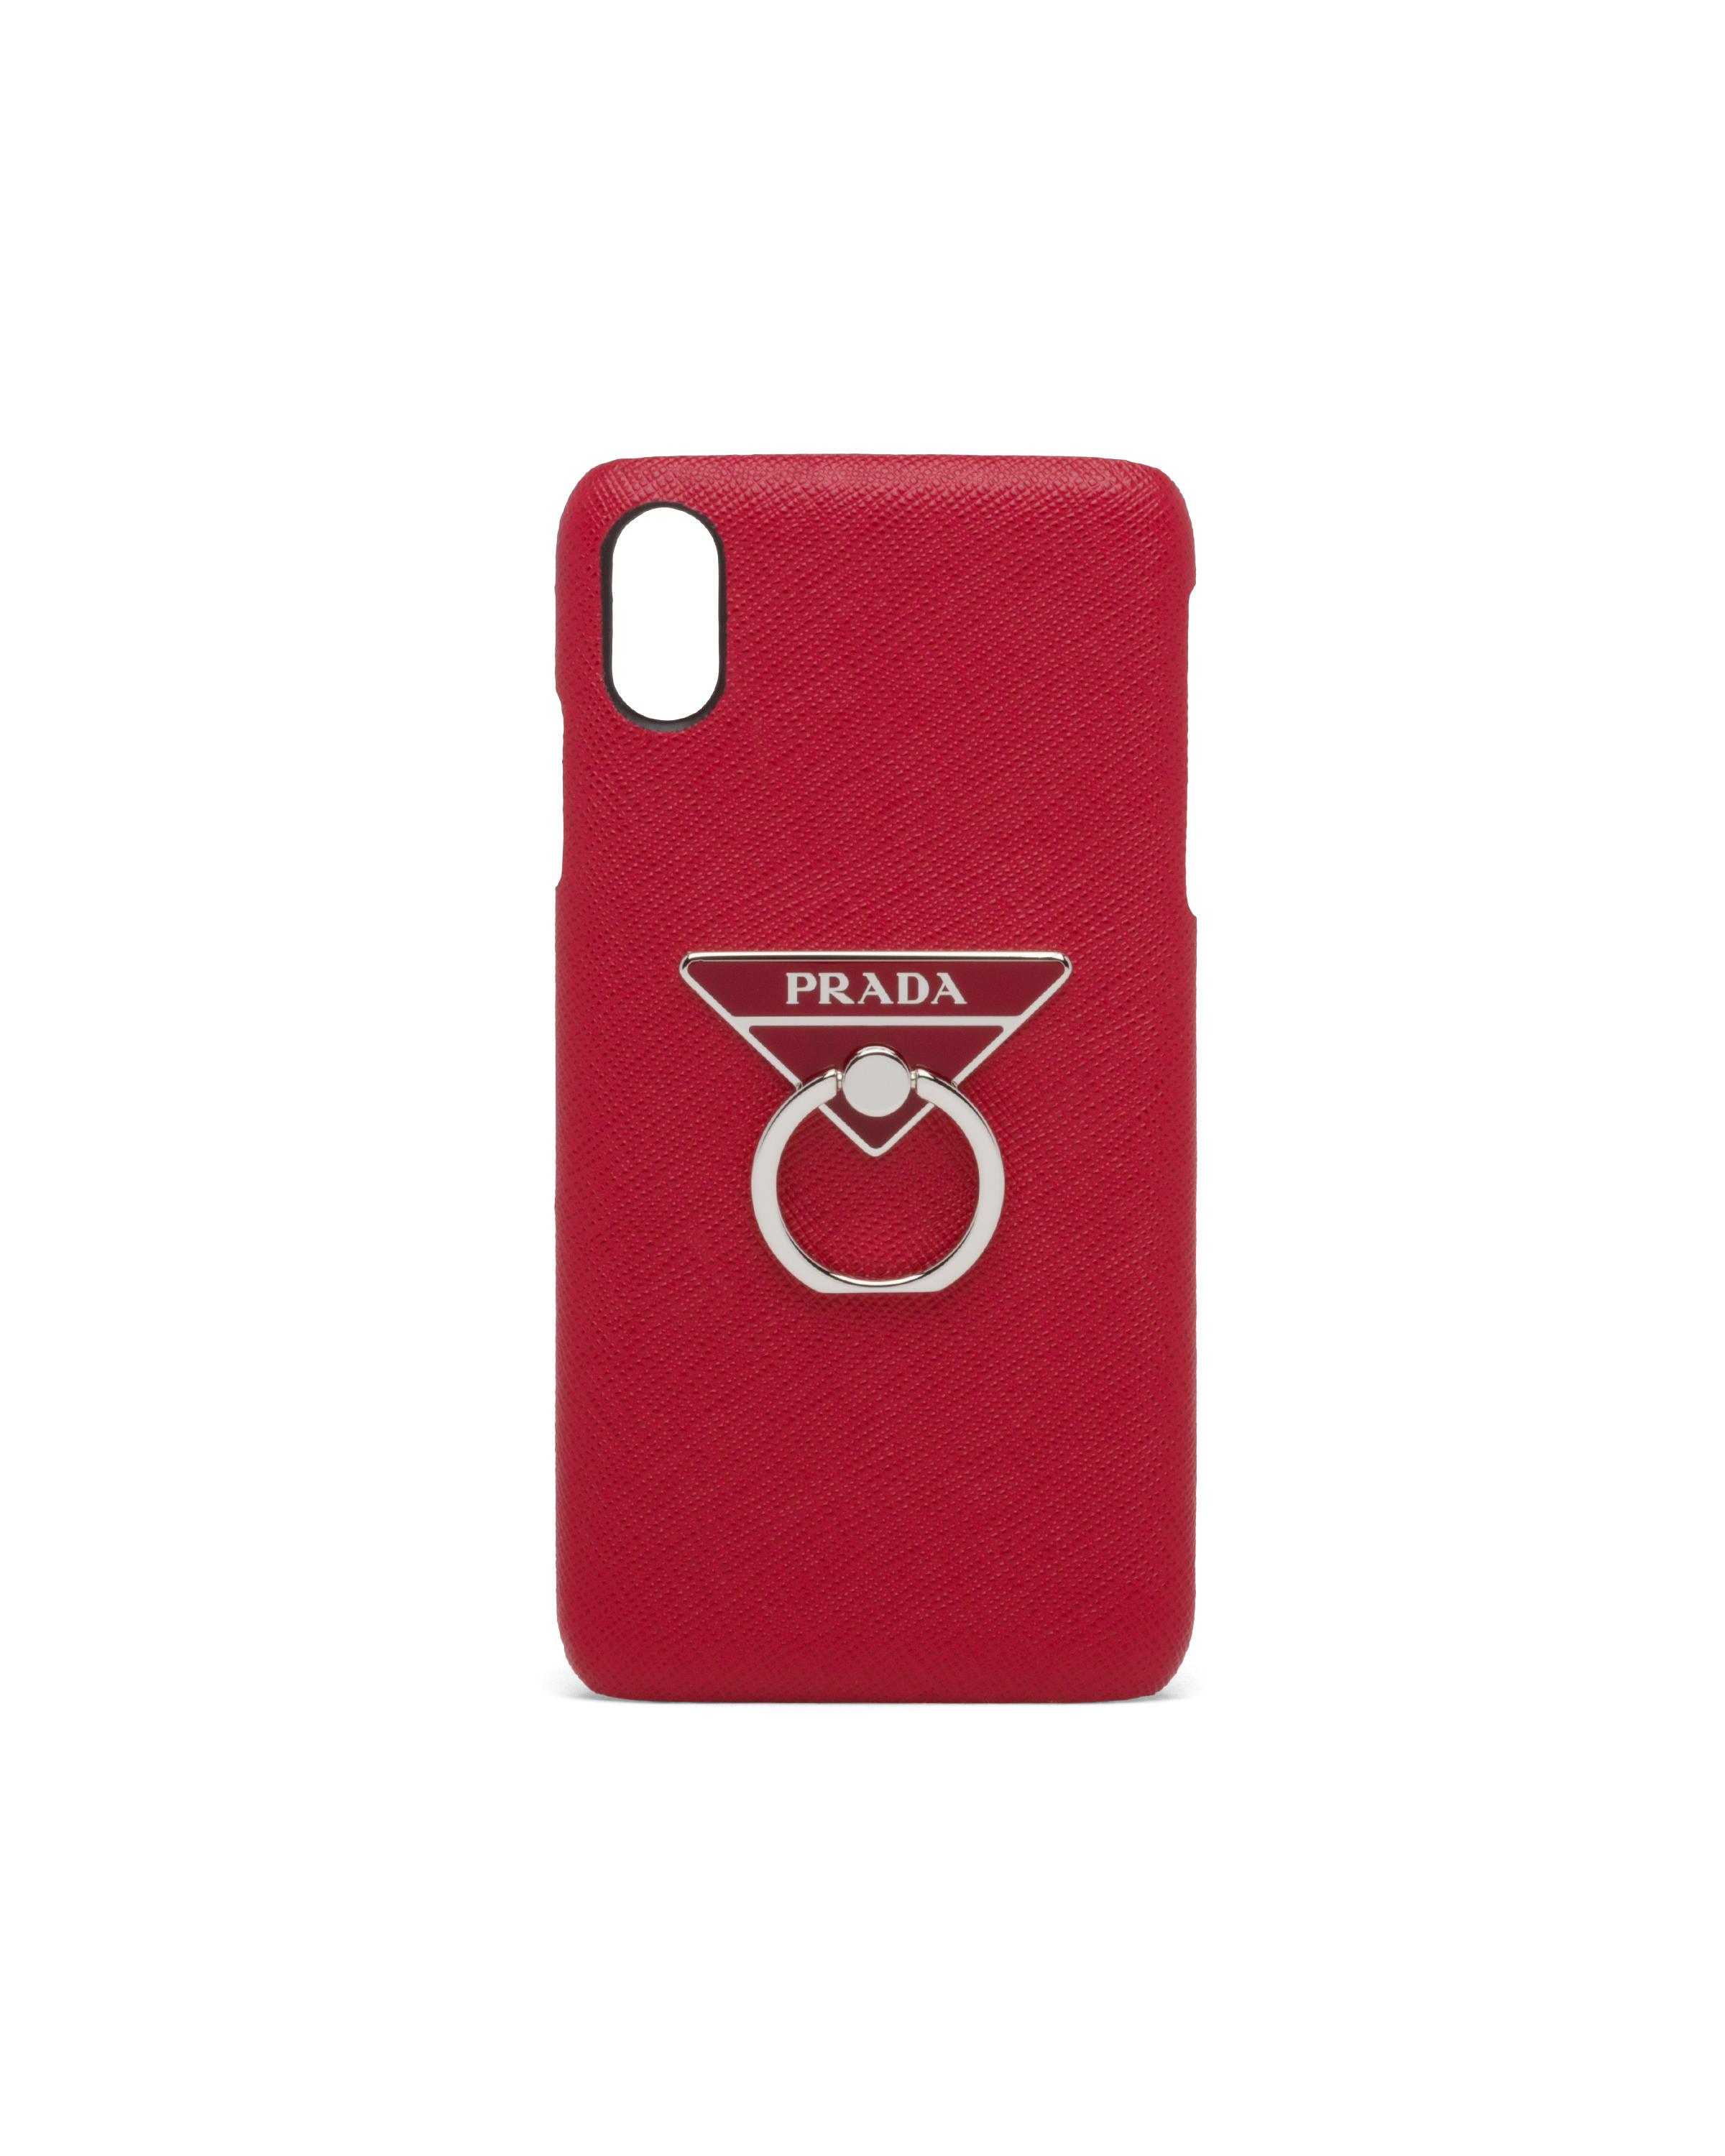 Prada Leather Saffiano Cover For Iphone Xs Max in Red | Lyst